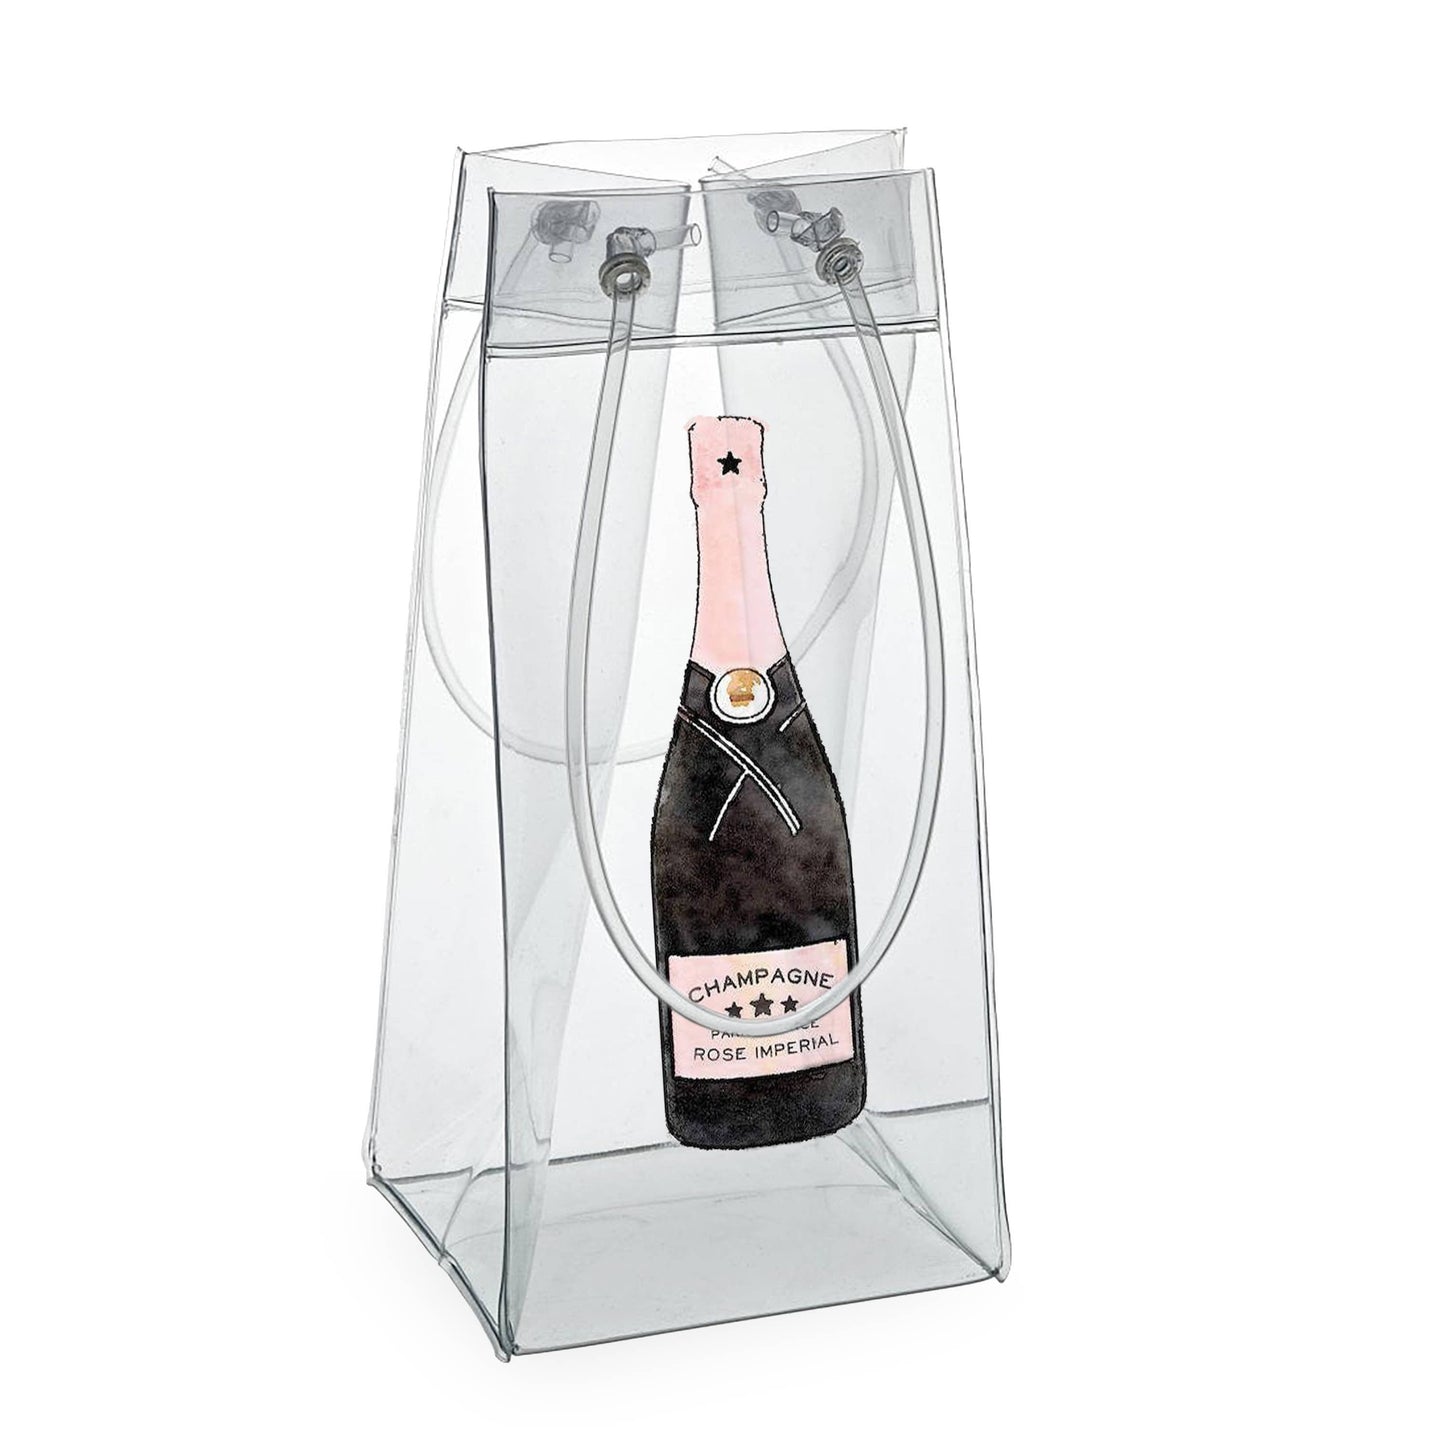 Just Add Ice- Champagne Bottle Bag